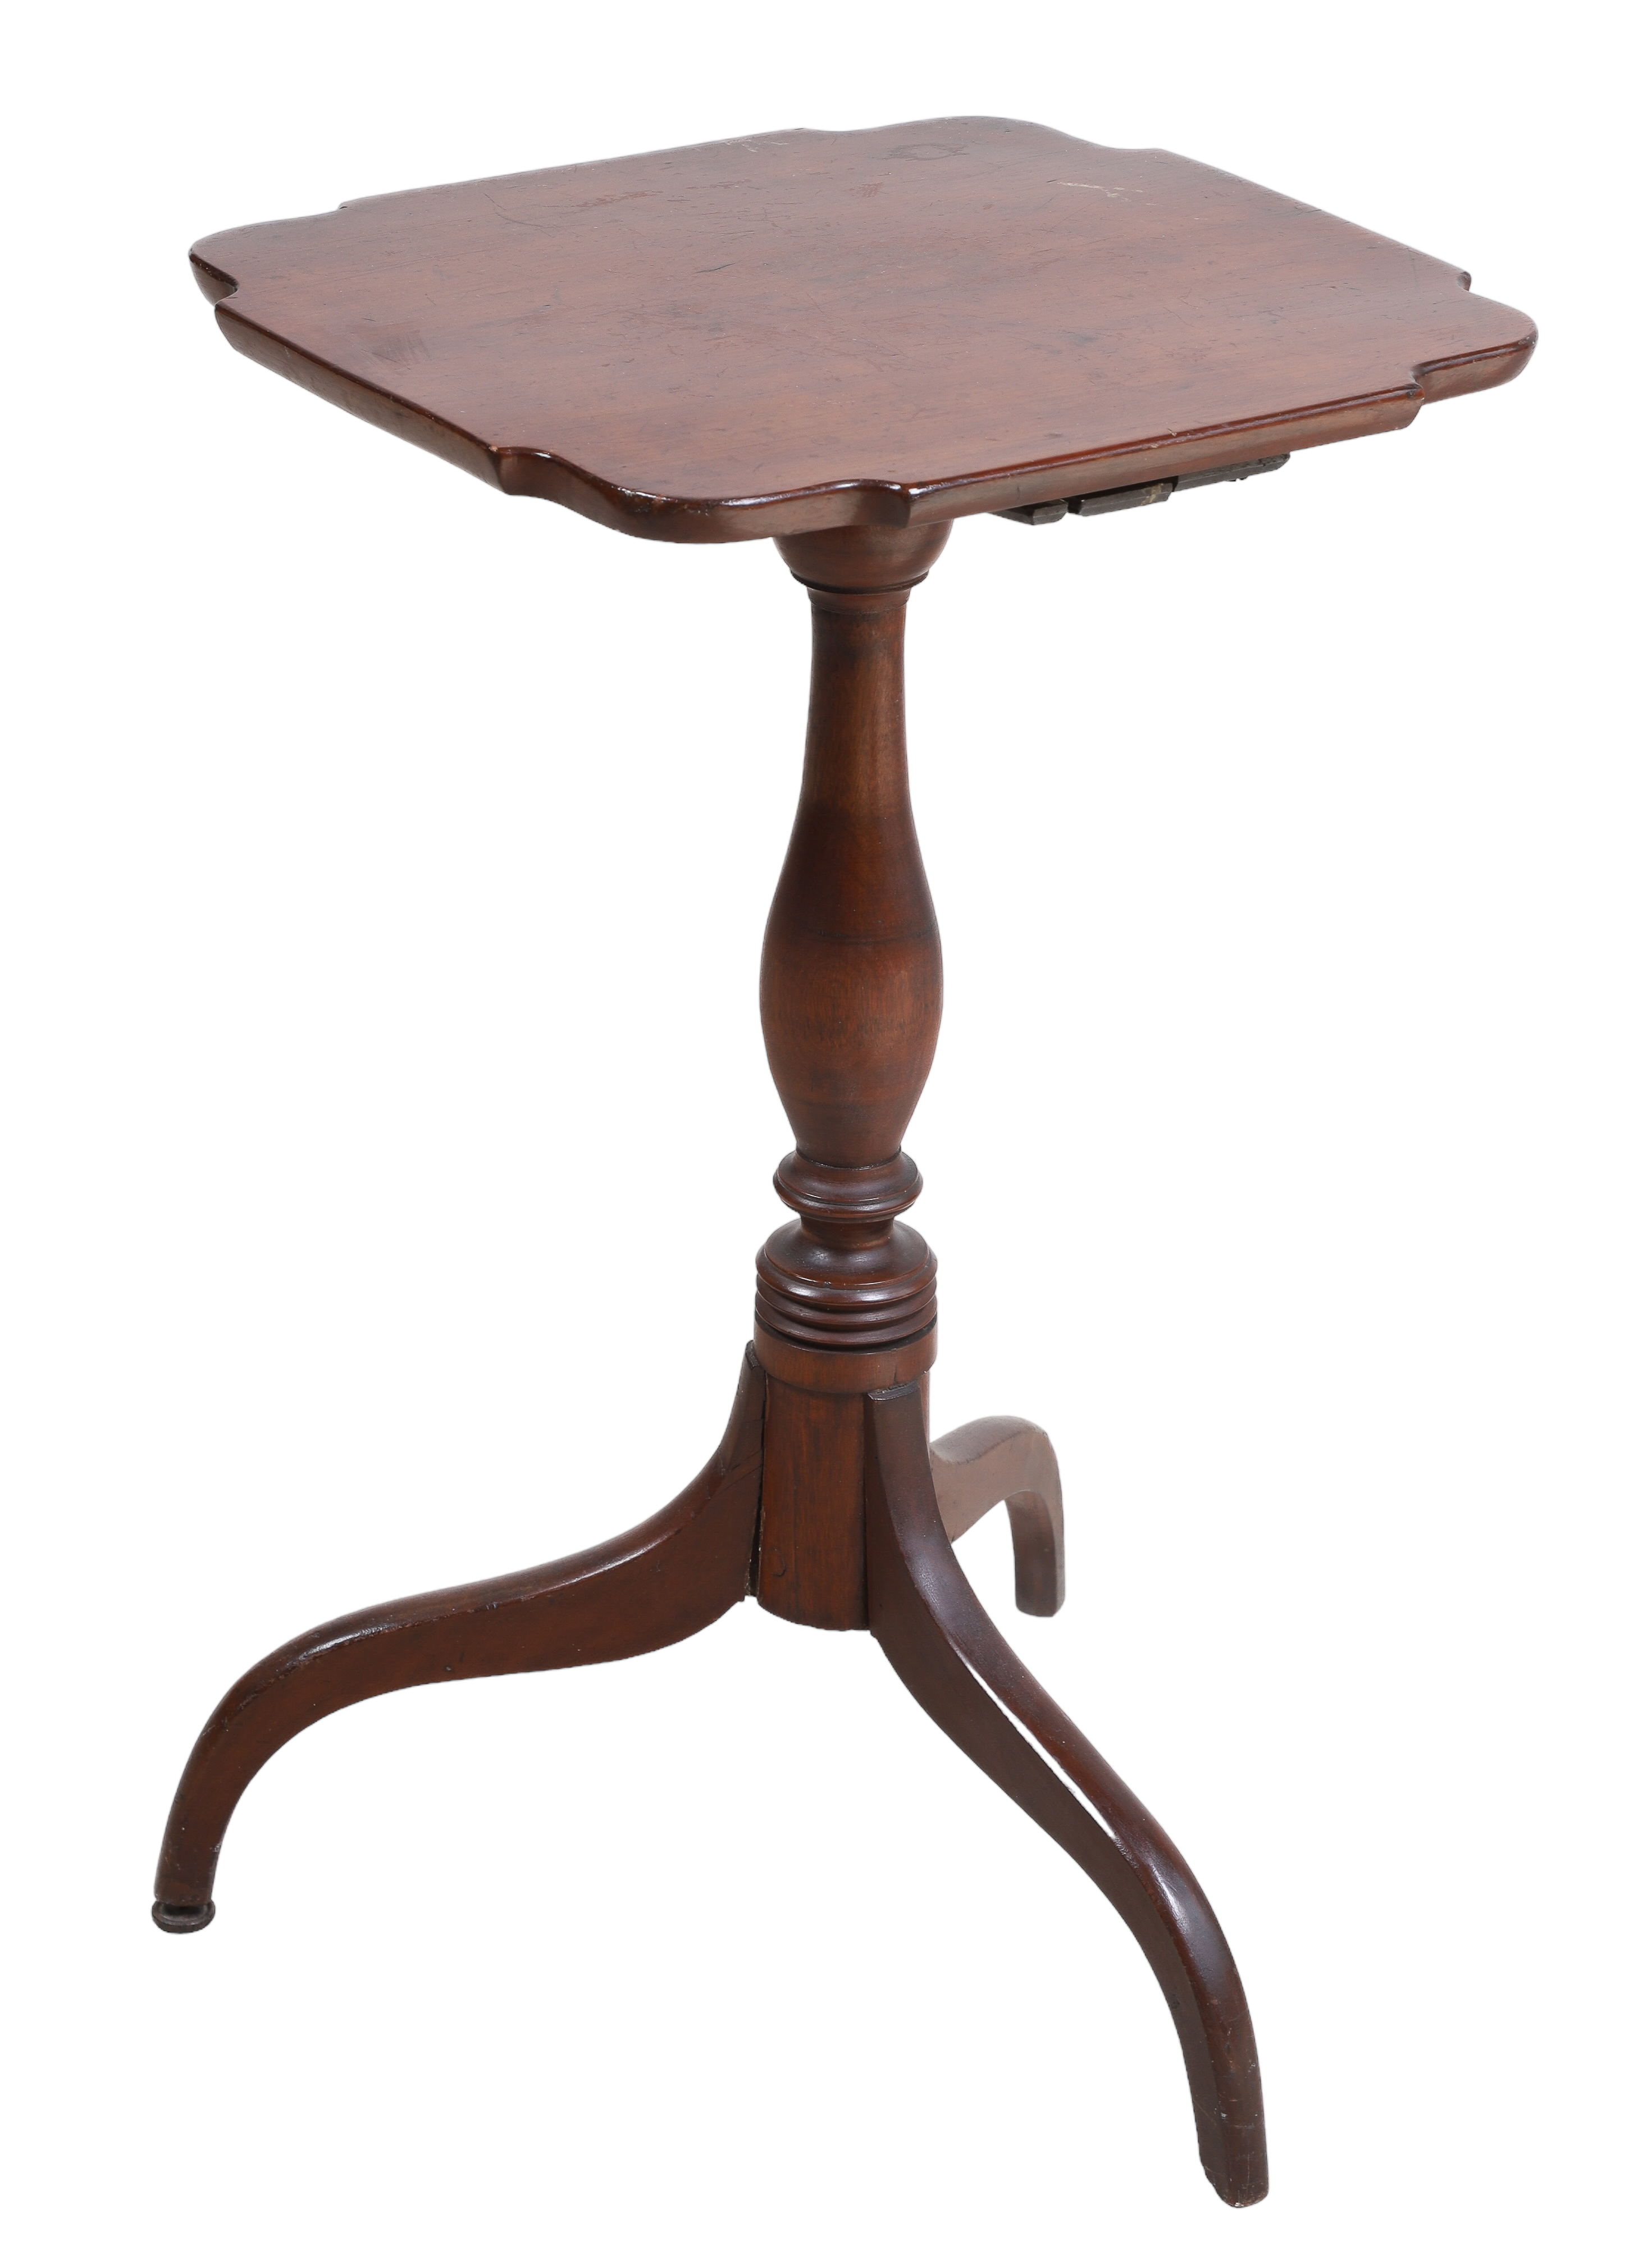 Federal style cherry candle stand  2e1a20